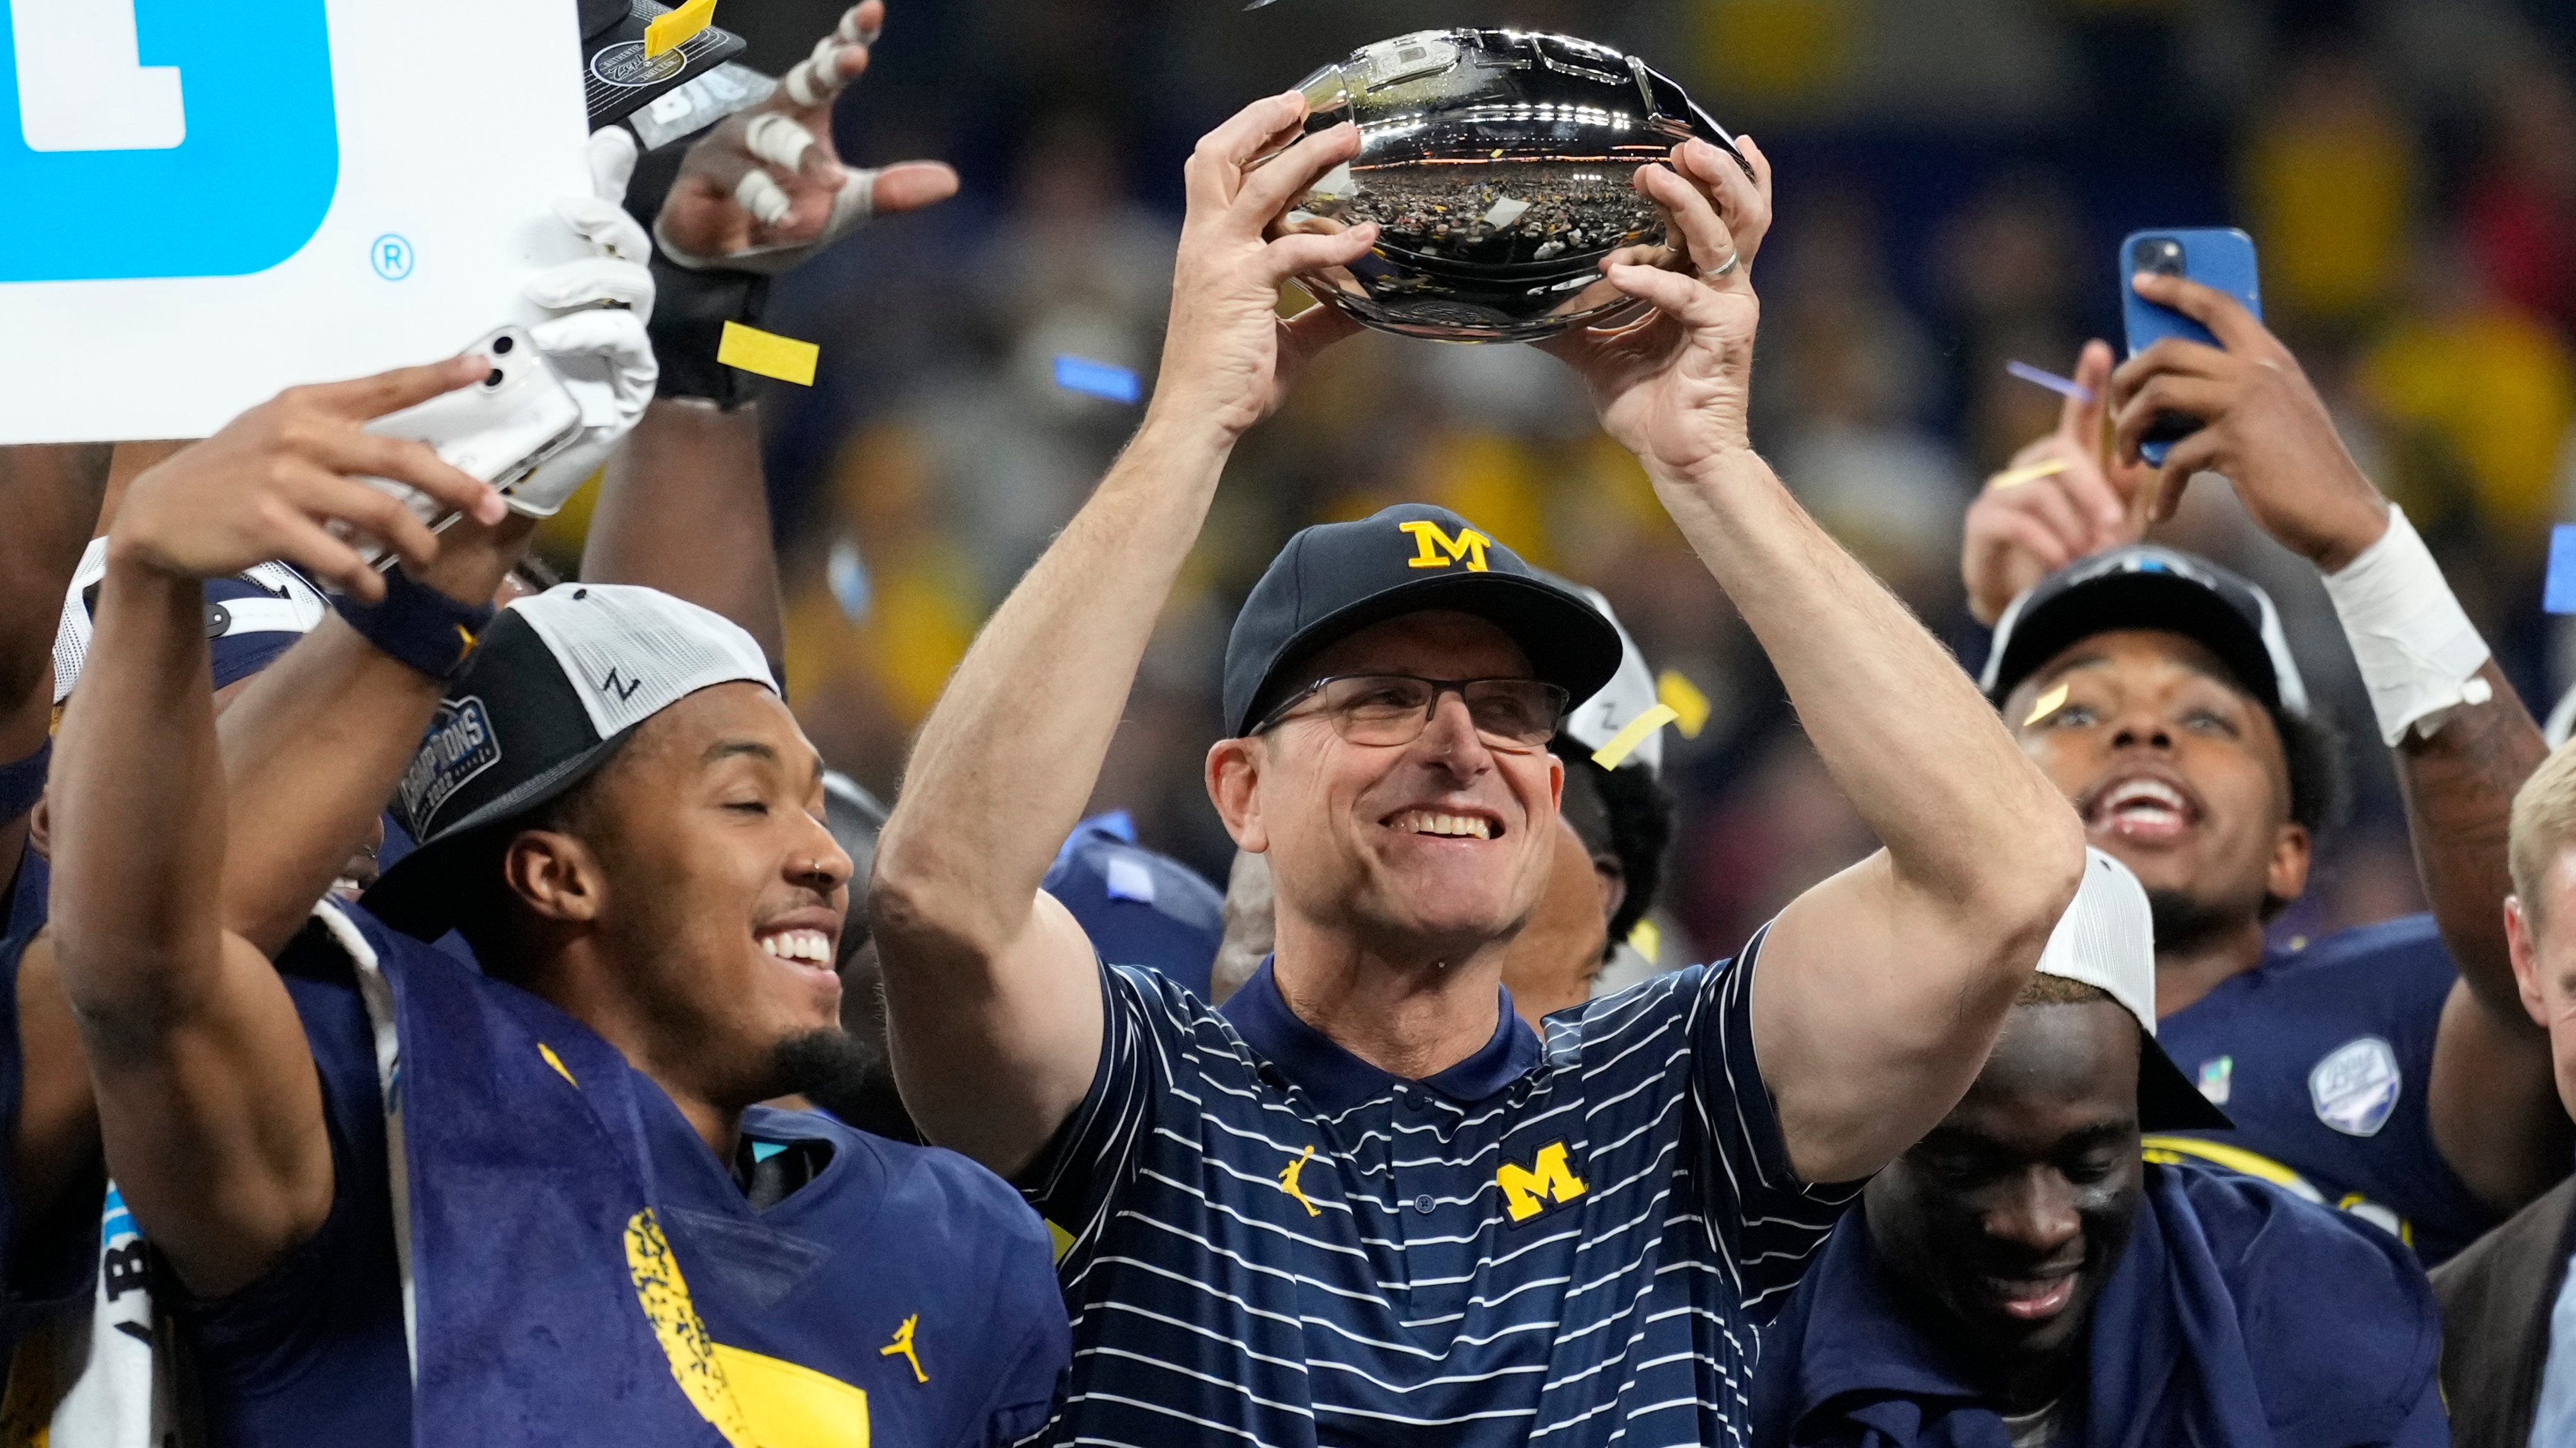 After dismantling Iowa Saturday, Harbaugh has Michigan in the playoff for the third consecutive season.